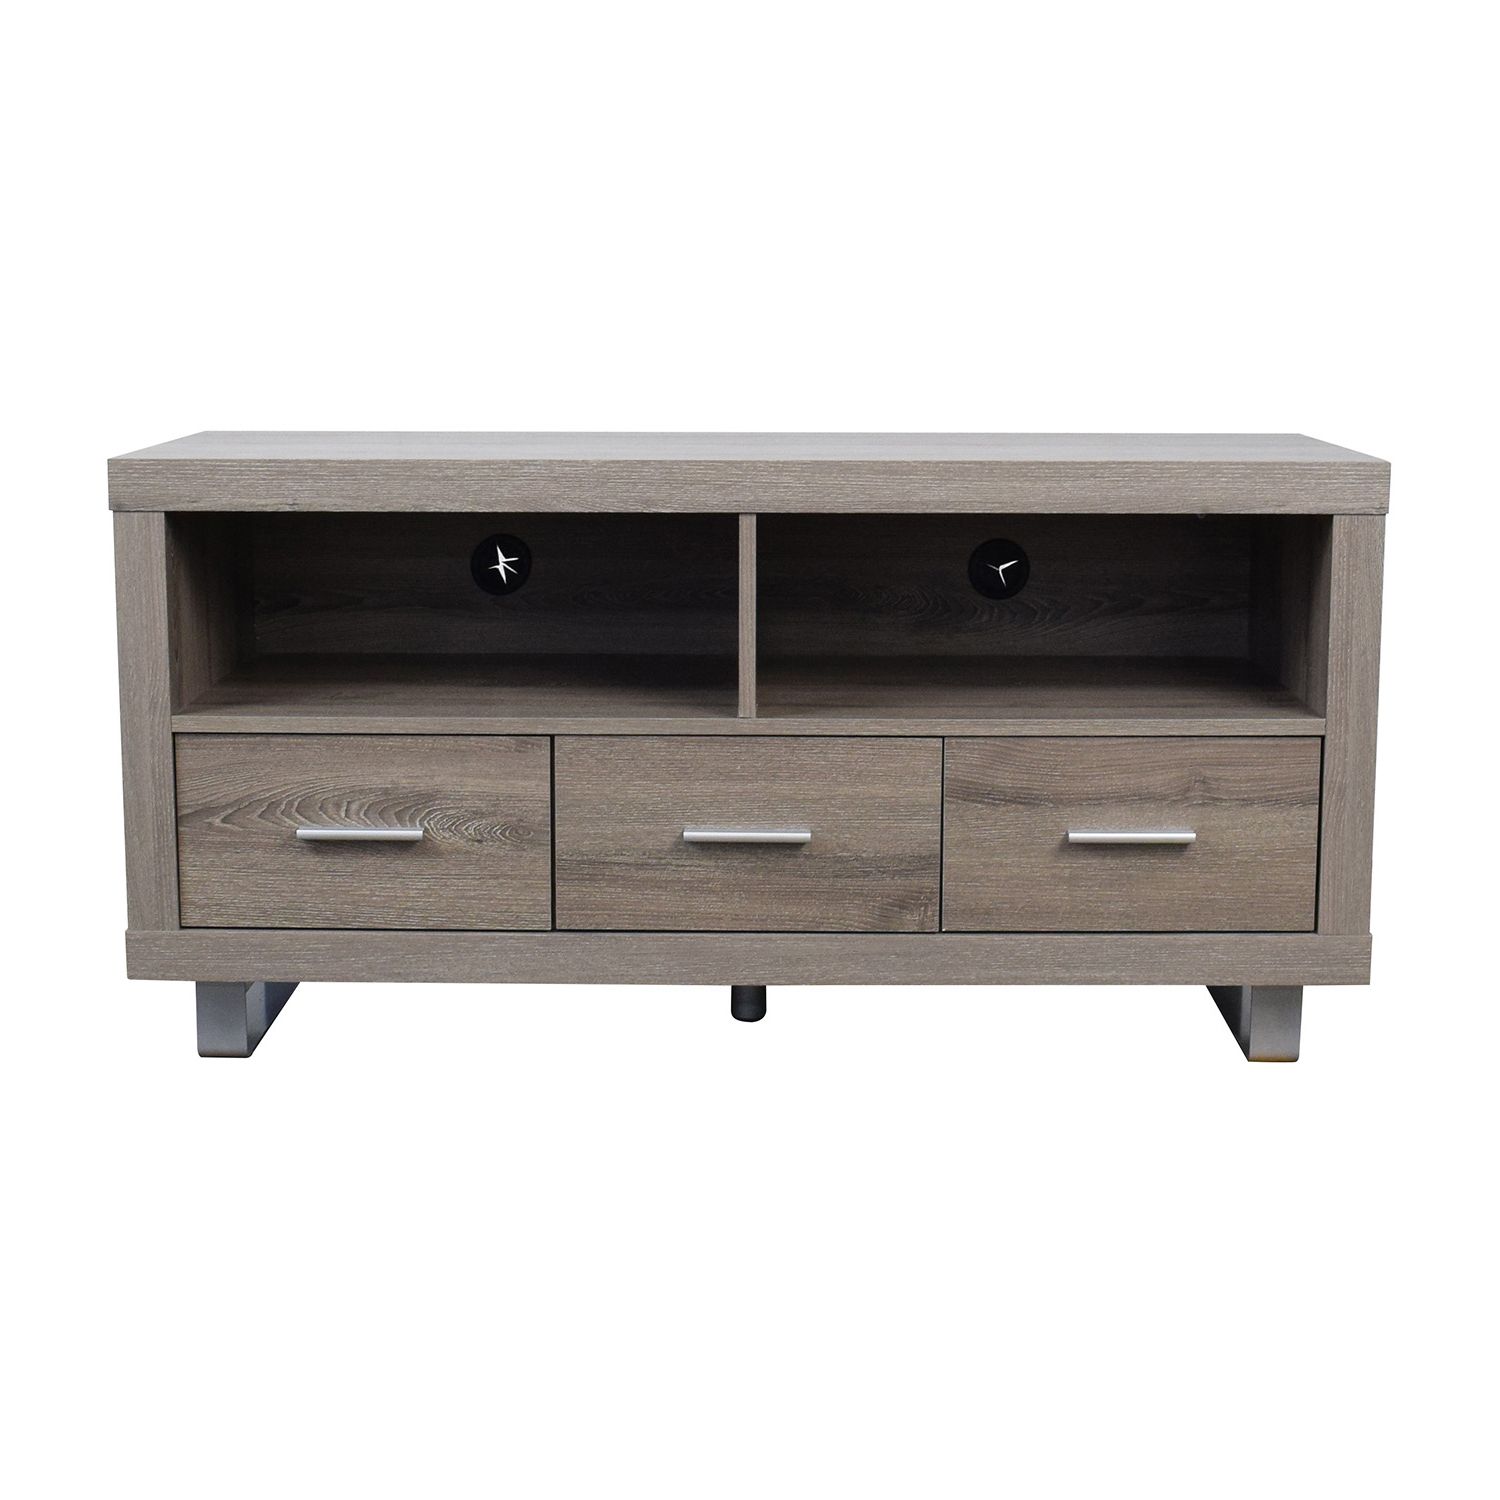 [%30% Off – Monarch Specialties Inc. Monarch Specialties Light Brown Within Well Known Light Colored Tv Stands|light Colored Tv Stands For 2018 30% Off – Monarch Specialties Inc. Monarch Specialties Light Brown|most Current Light Colored Tv Stands With Regard To 30% Off – Monarch Specialties Inc. Monarch Specialties Light Brown|preferred 30% Off – Monarch Specialties Inc. Monarch Specialties Light Brown Regarding Light Colored Tv Stands%] (Photo 1 of 20)